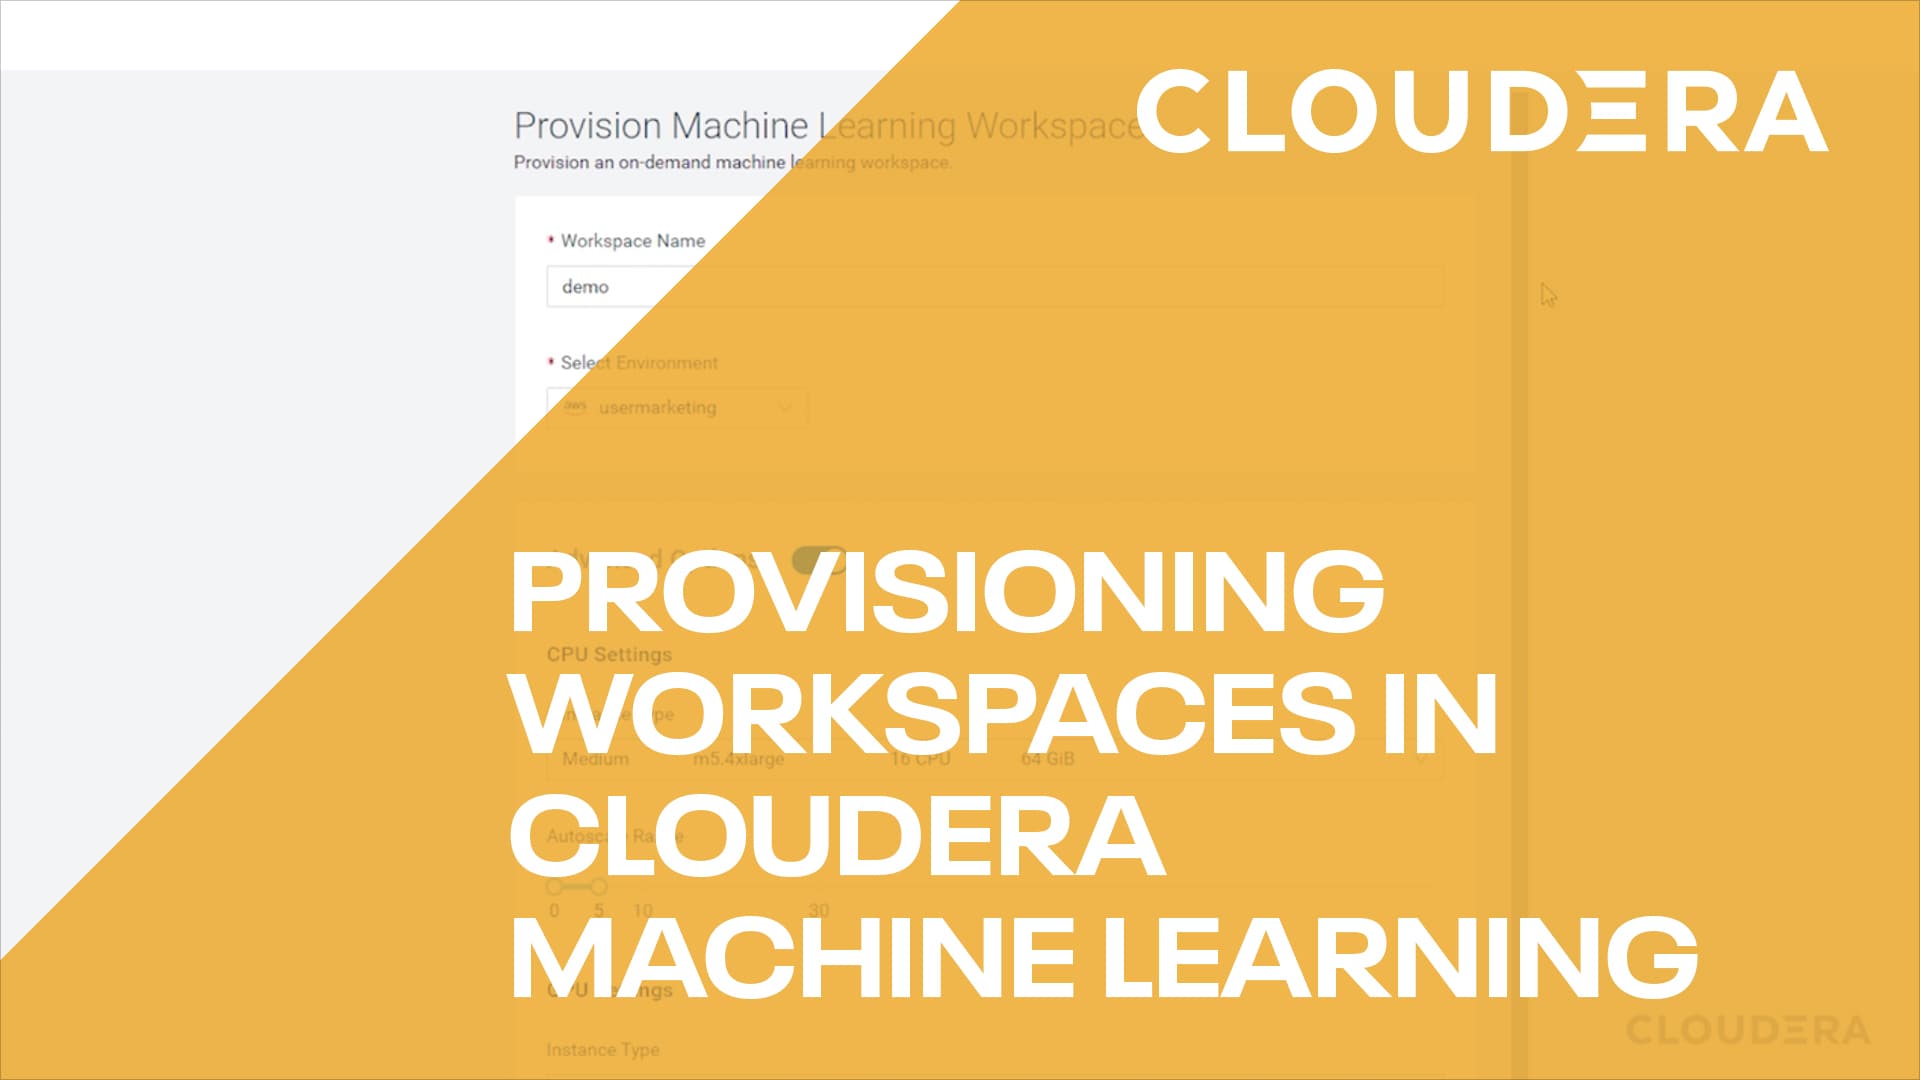 Provisioning Workspaces in Cloudera Machine Learning